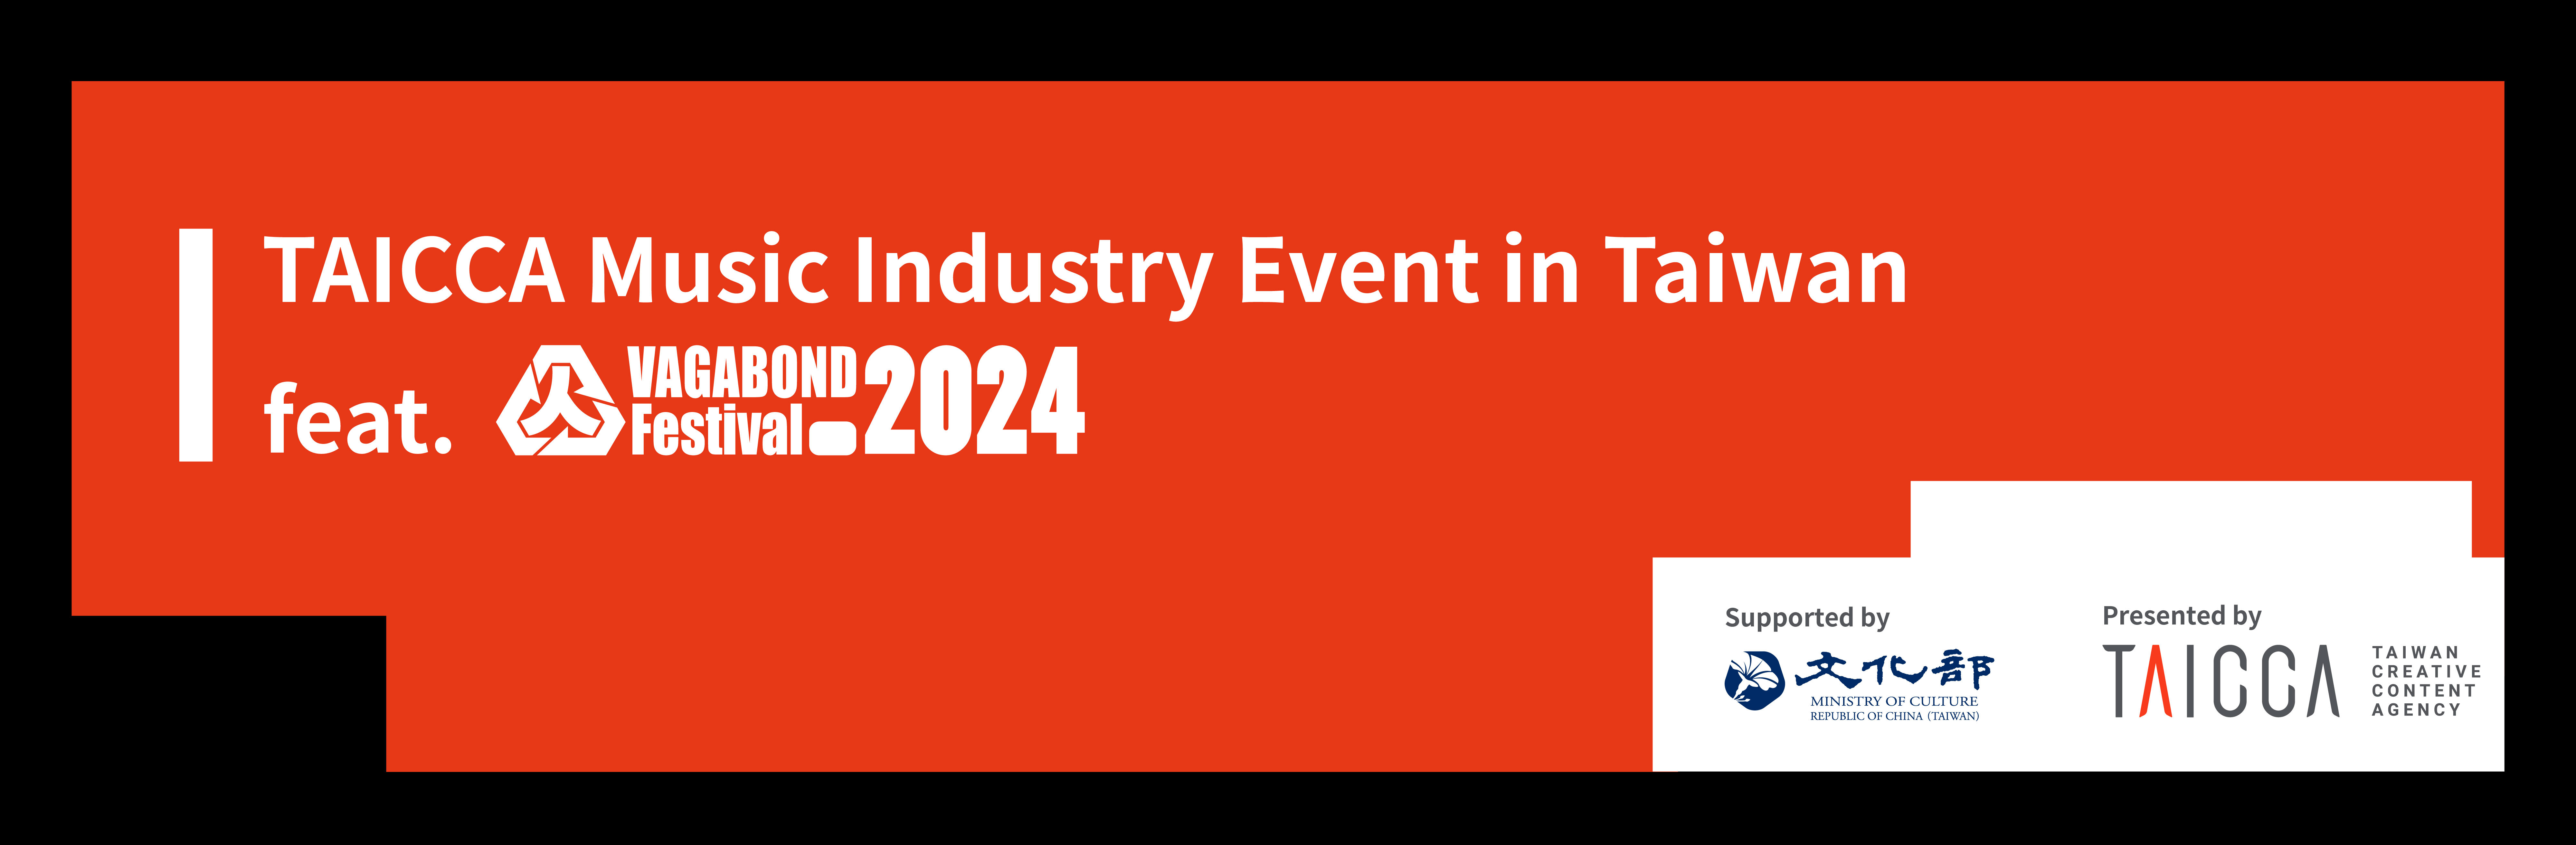 2024 TAICCA Music Industry Event in Taiwan feat. Vagabond Festival